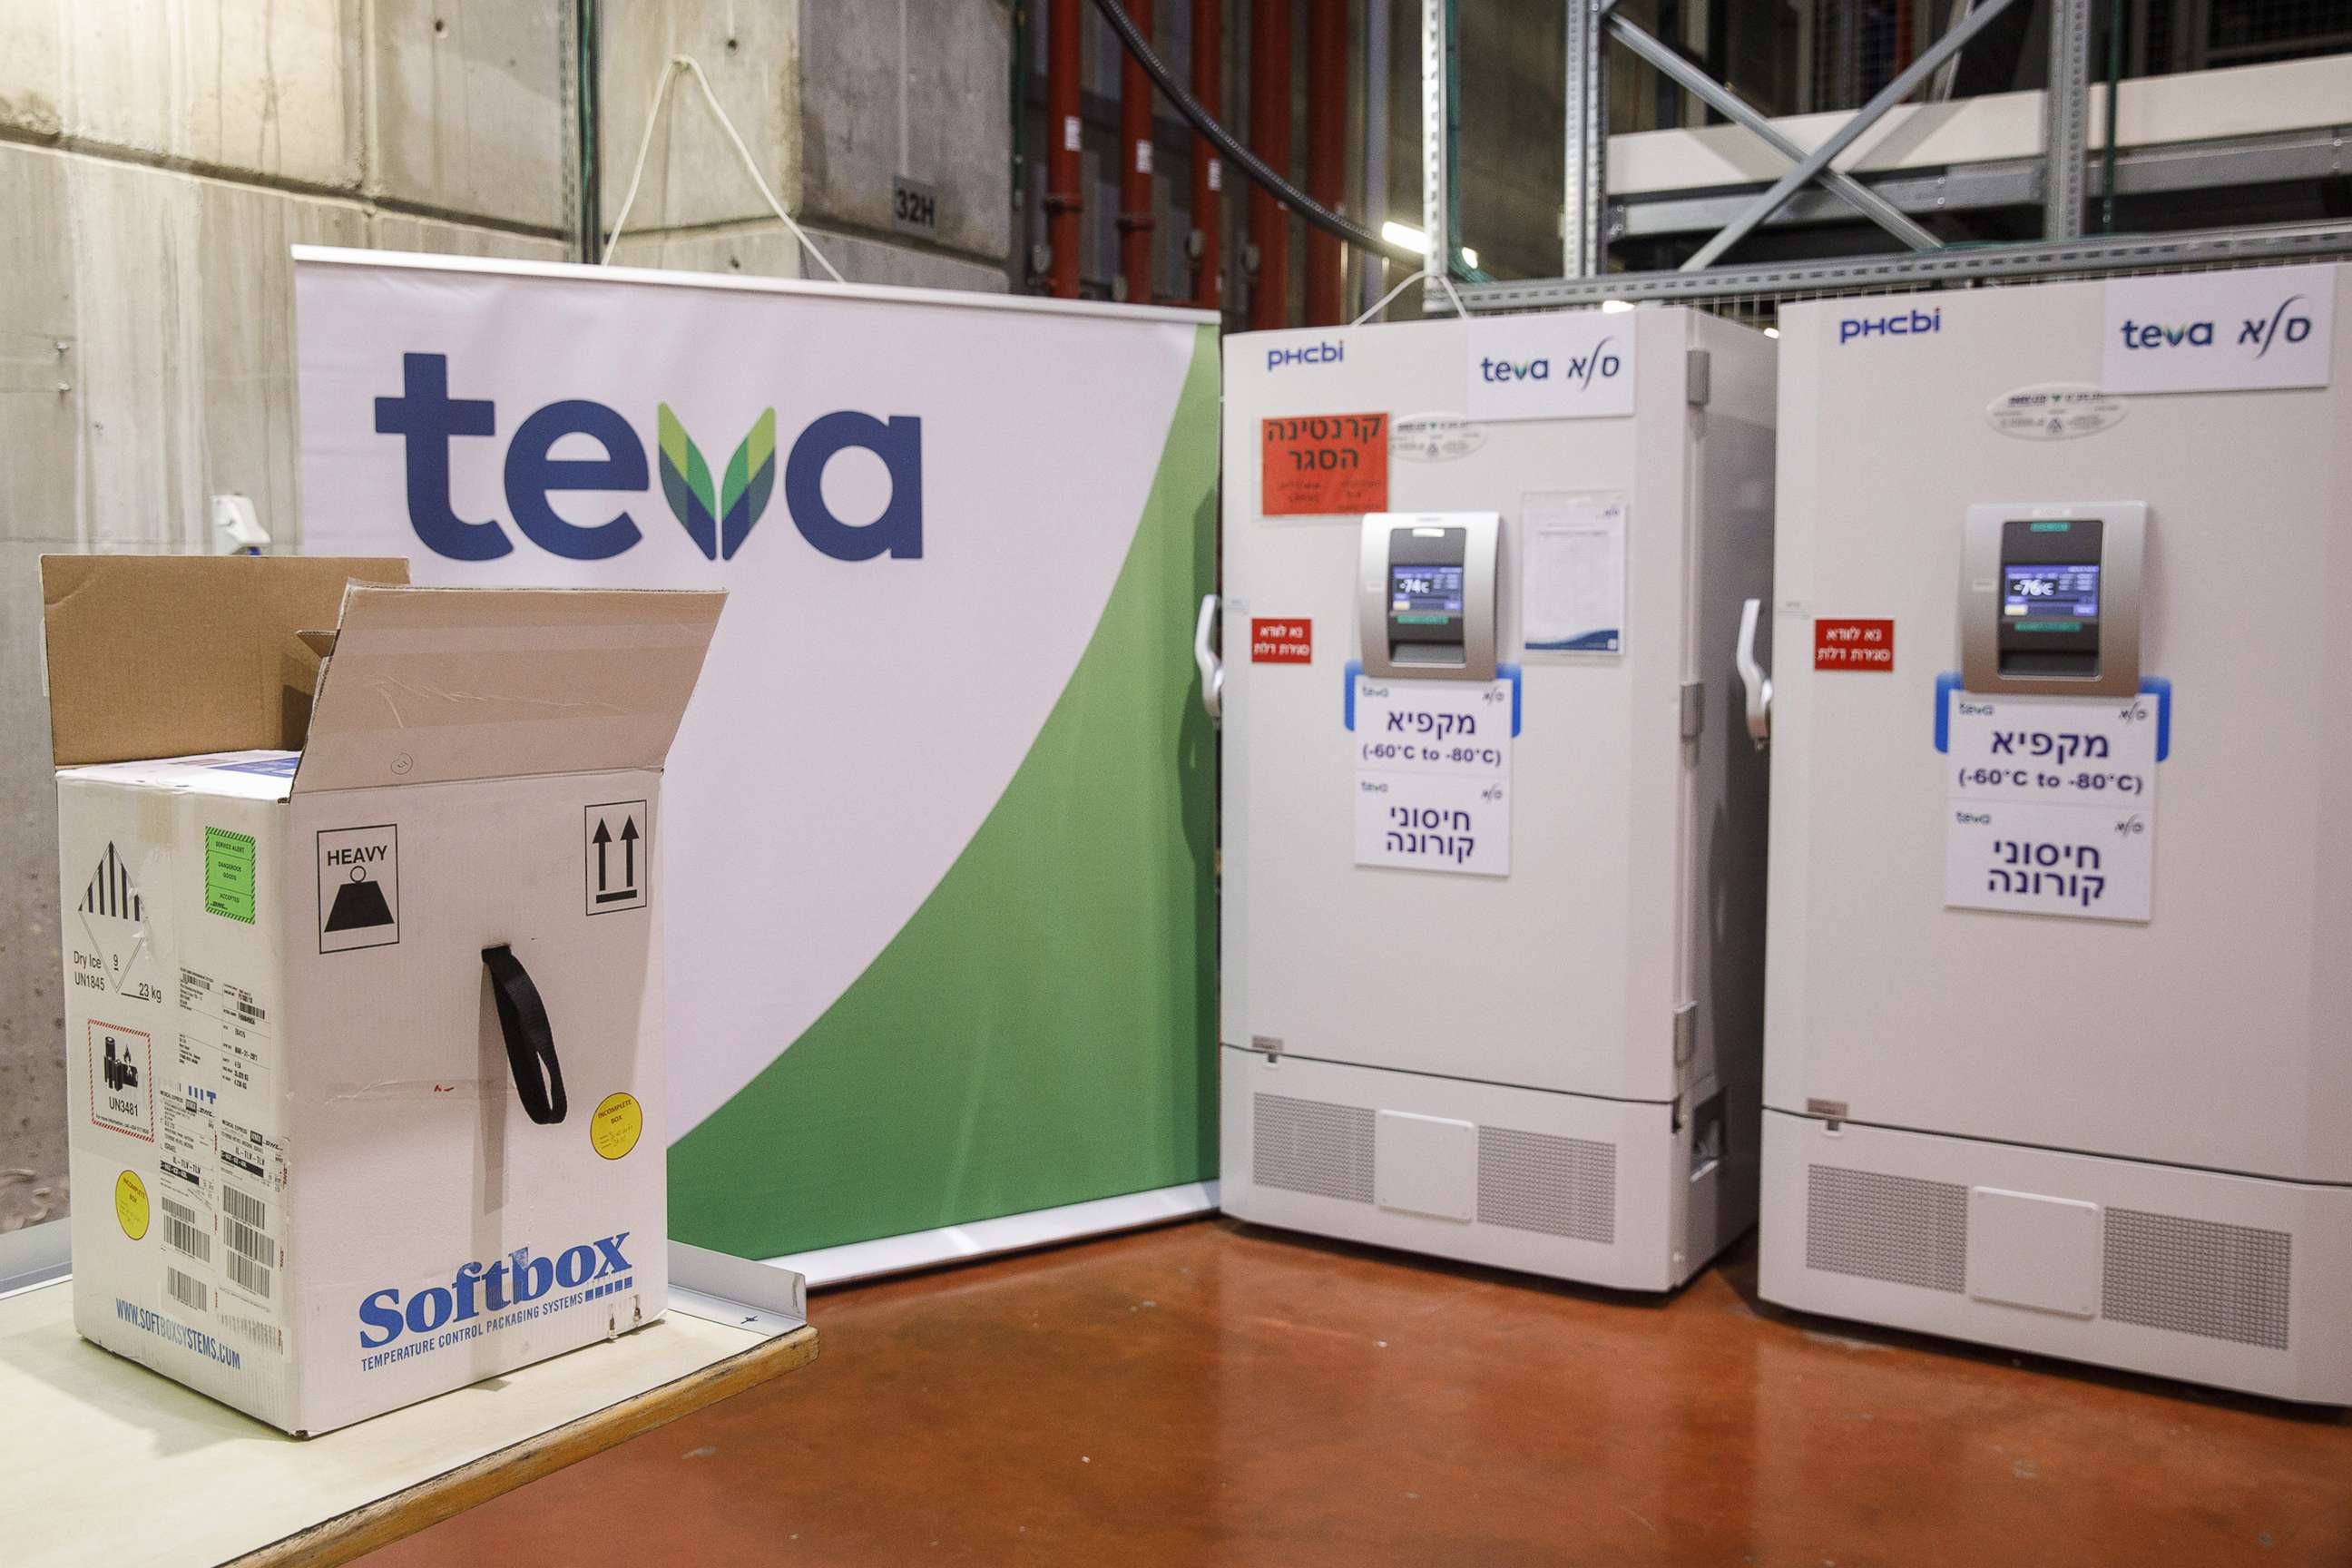 PHOTO: Refrigeration units used for vaccine storage at a Teva Pharmaceutical Industries Ltd. warehouse in Shoam, Israel, Dec. 10, 2020.